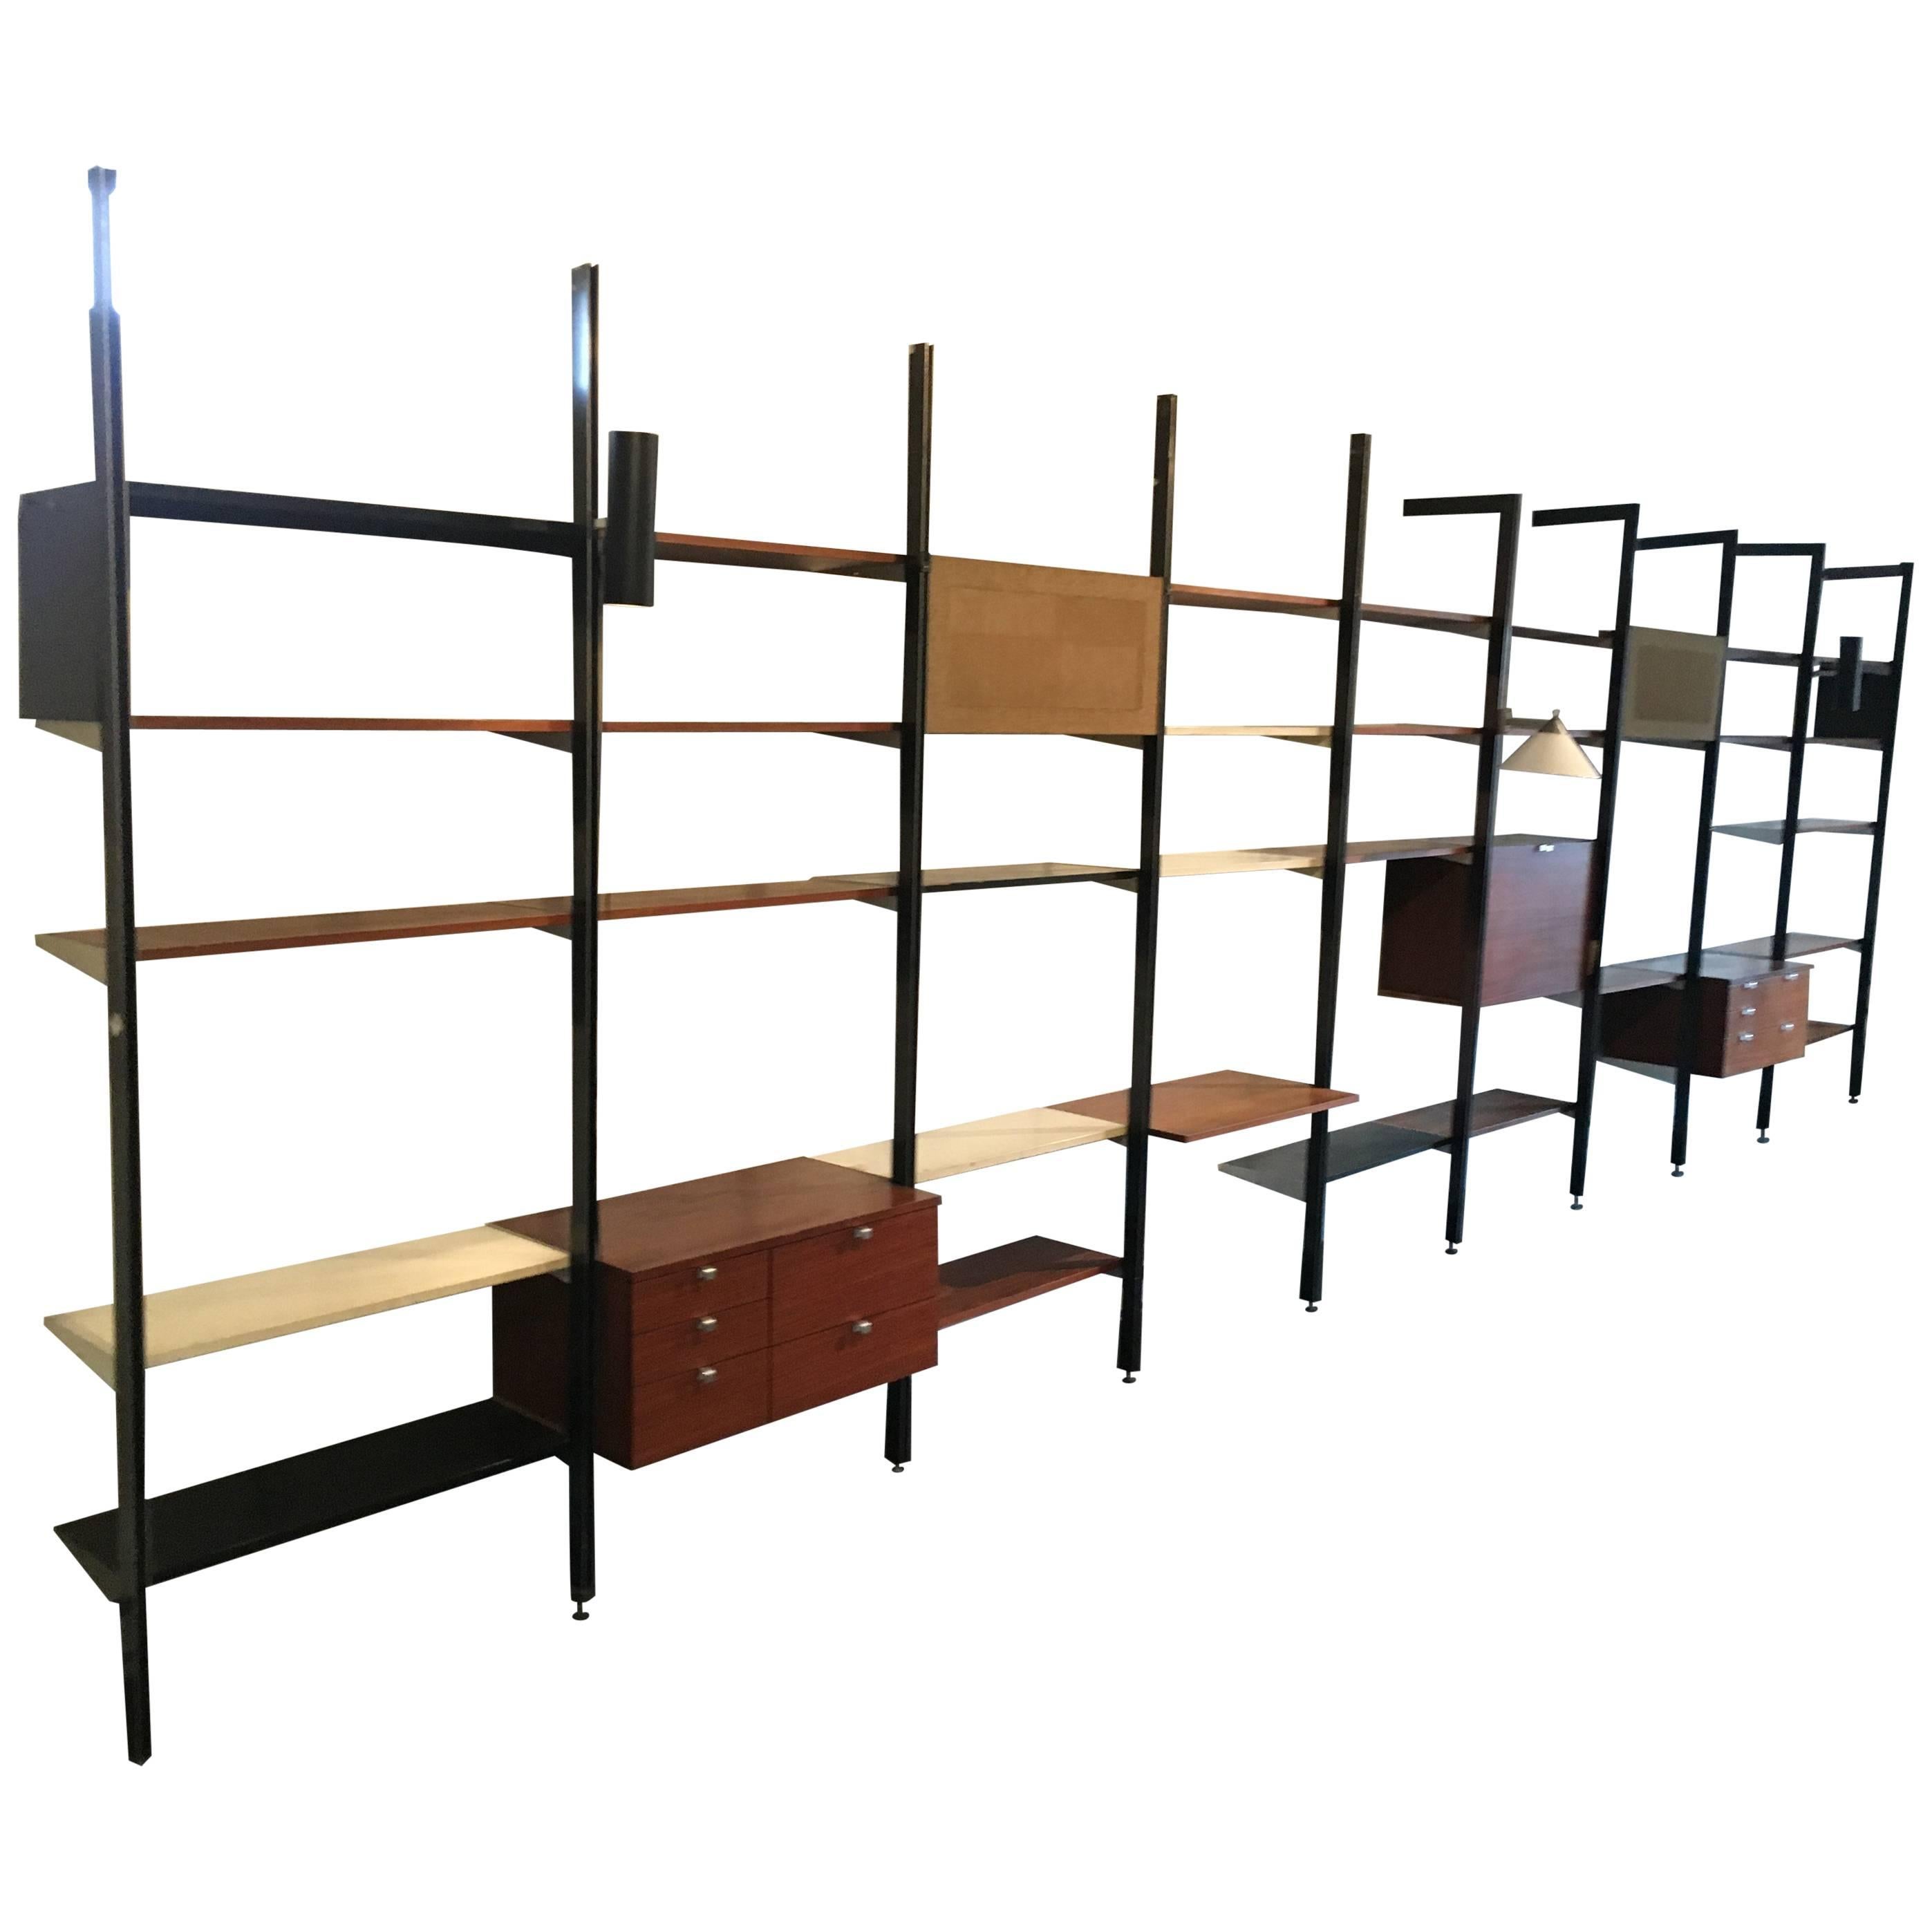 Three bay CSS, designed by George Nelson for Herman Miller,
walnut shelves an cabinets.

Bright Lyons specializes in George Nelson's CSS storage system of 1959. We currently have several bays available with many different cabinet, lighting, and